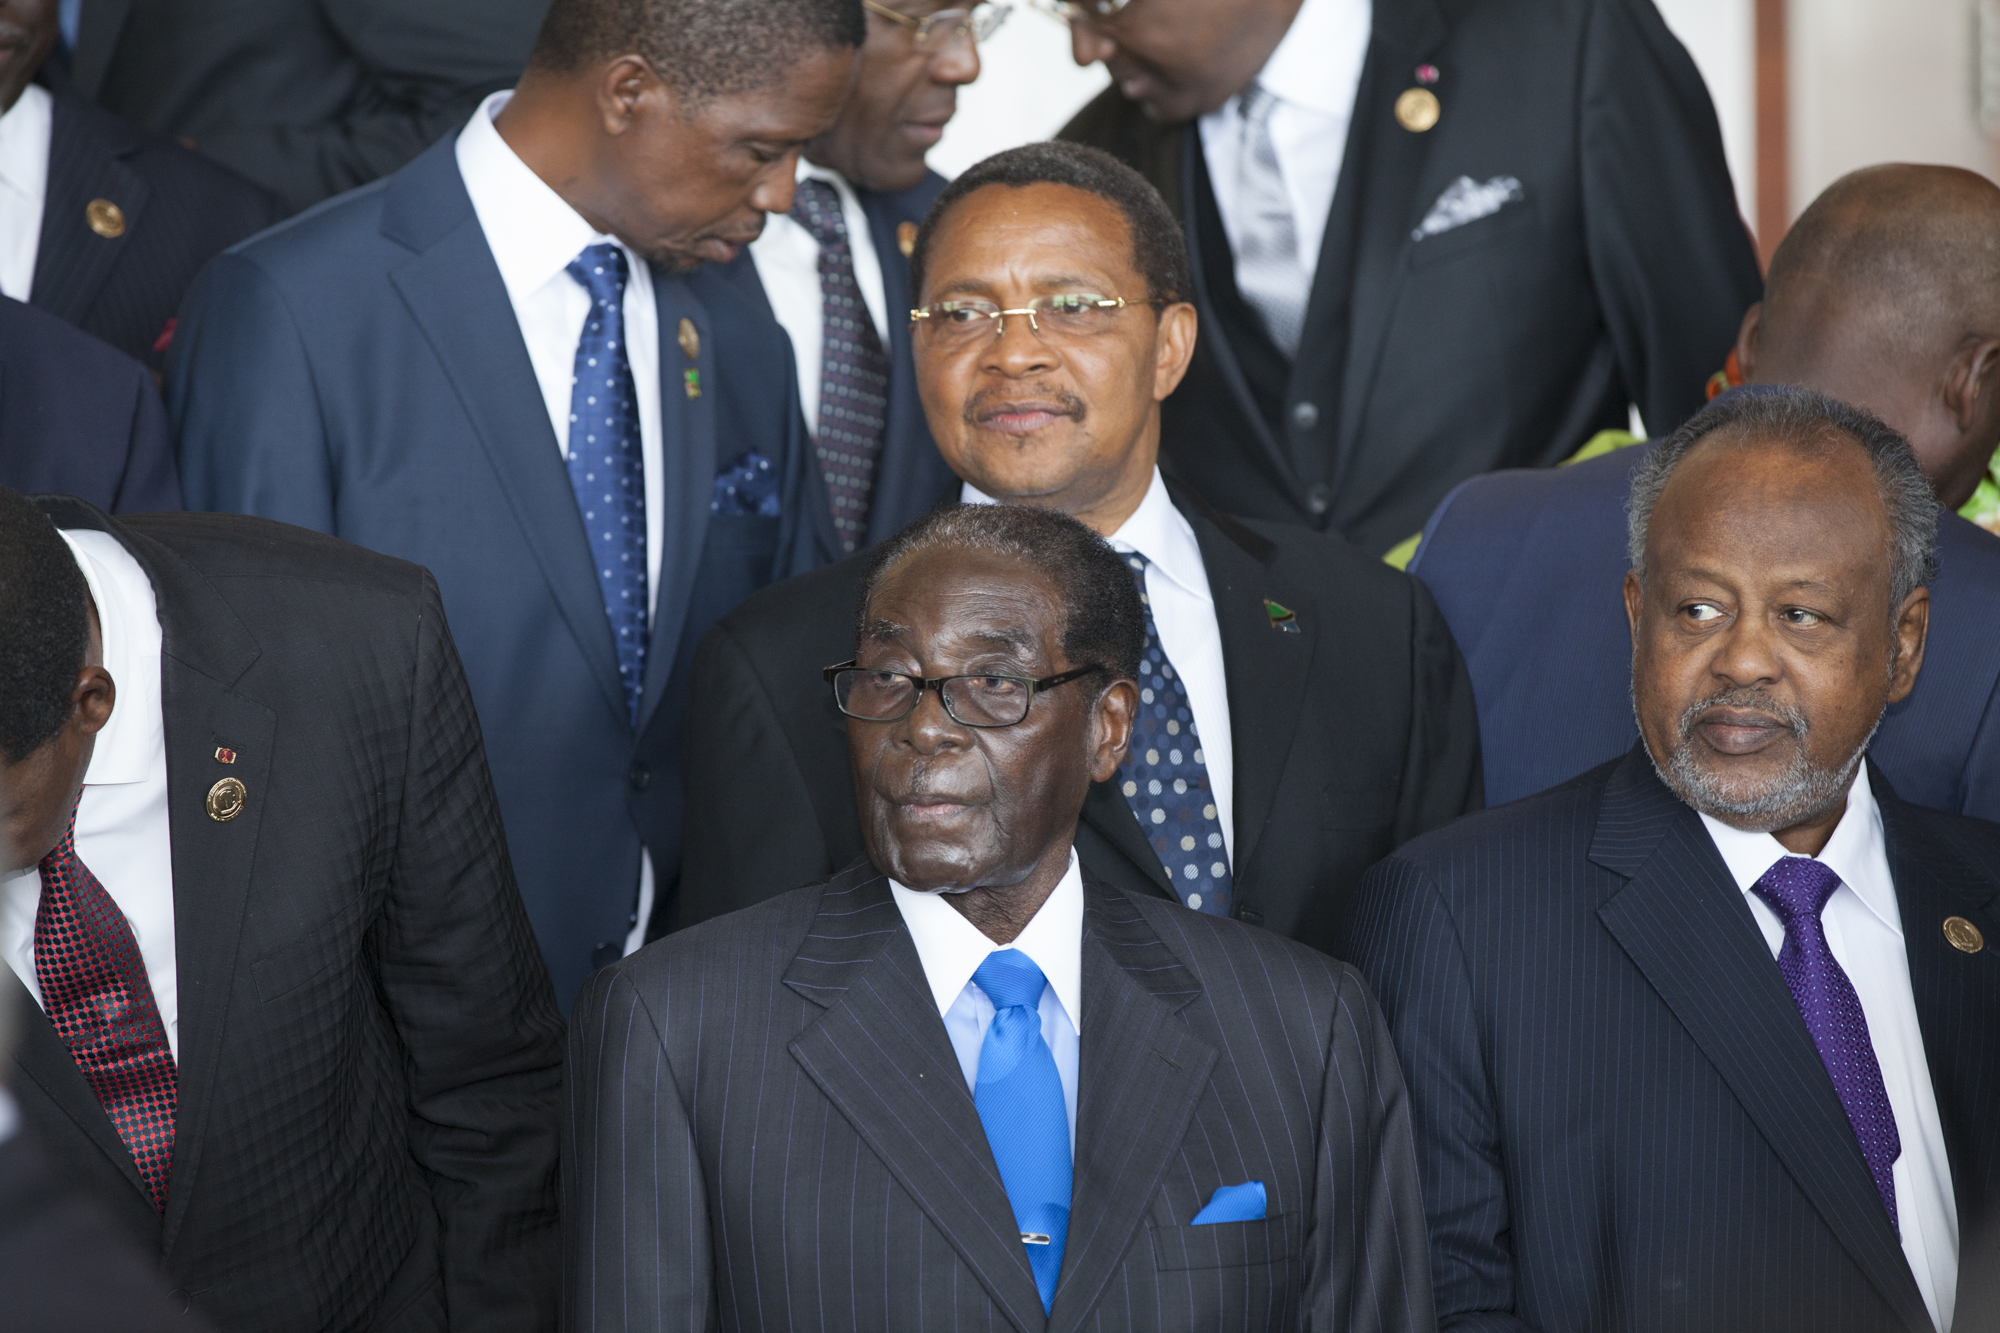  Robert Mugabe, President of Zimbabwe, is pictured at the opening ceremony of the 24th Heads of State meeting at the African Union in Addis Ababa 30 Jan 2015. 